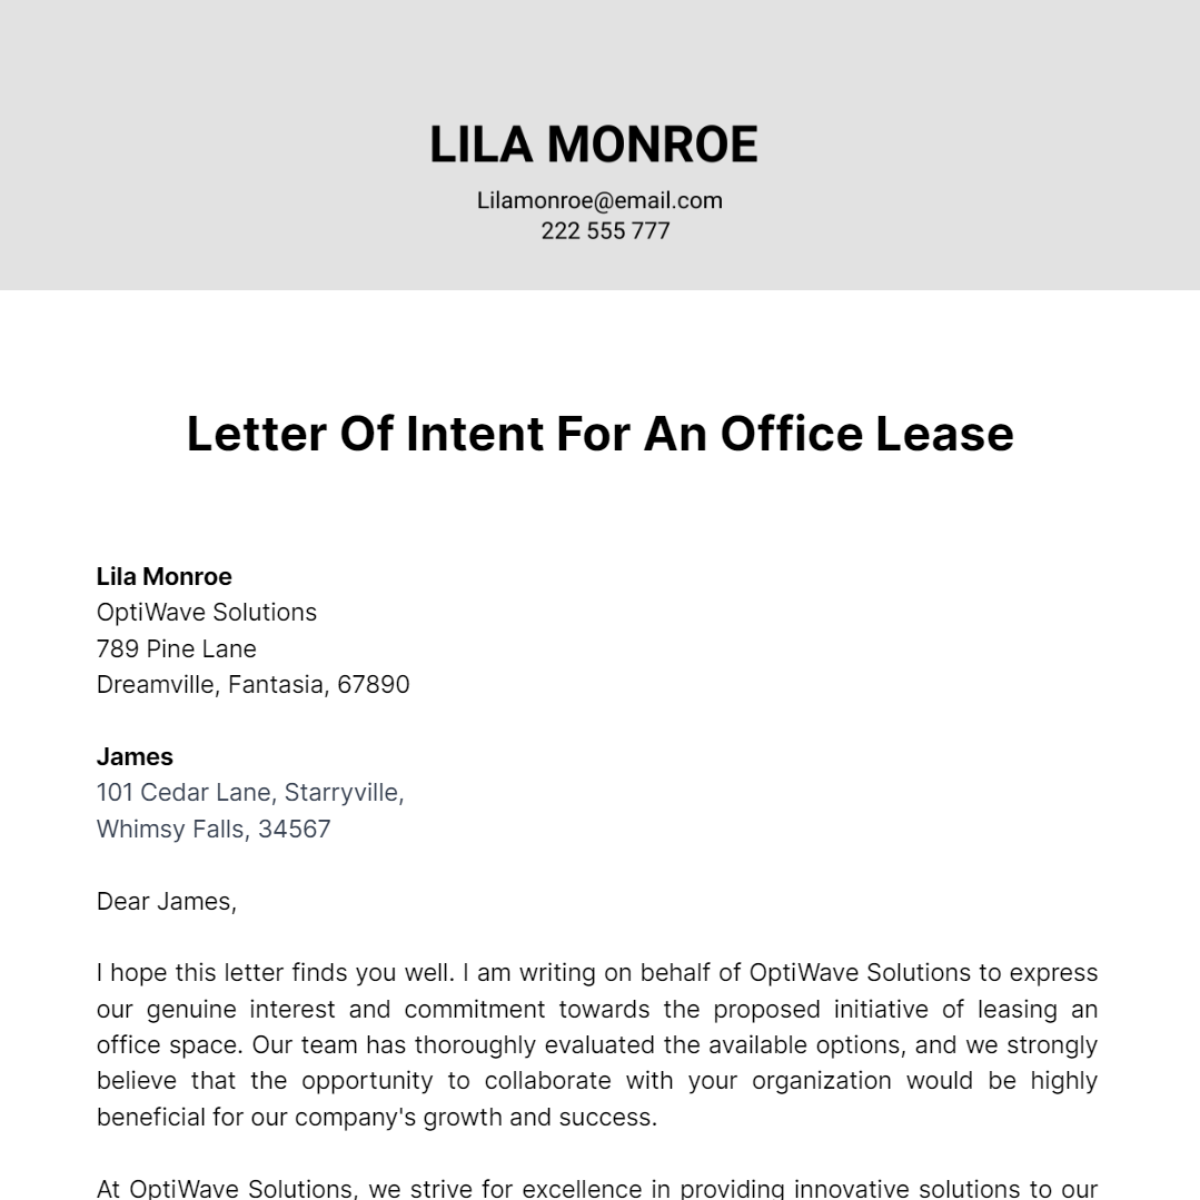 Letter of Intent for an Office Lease Template